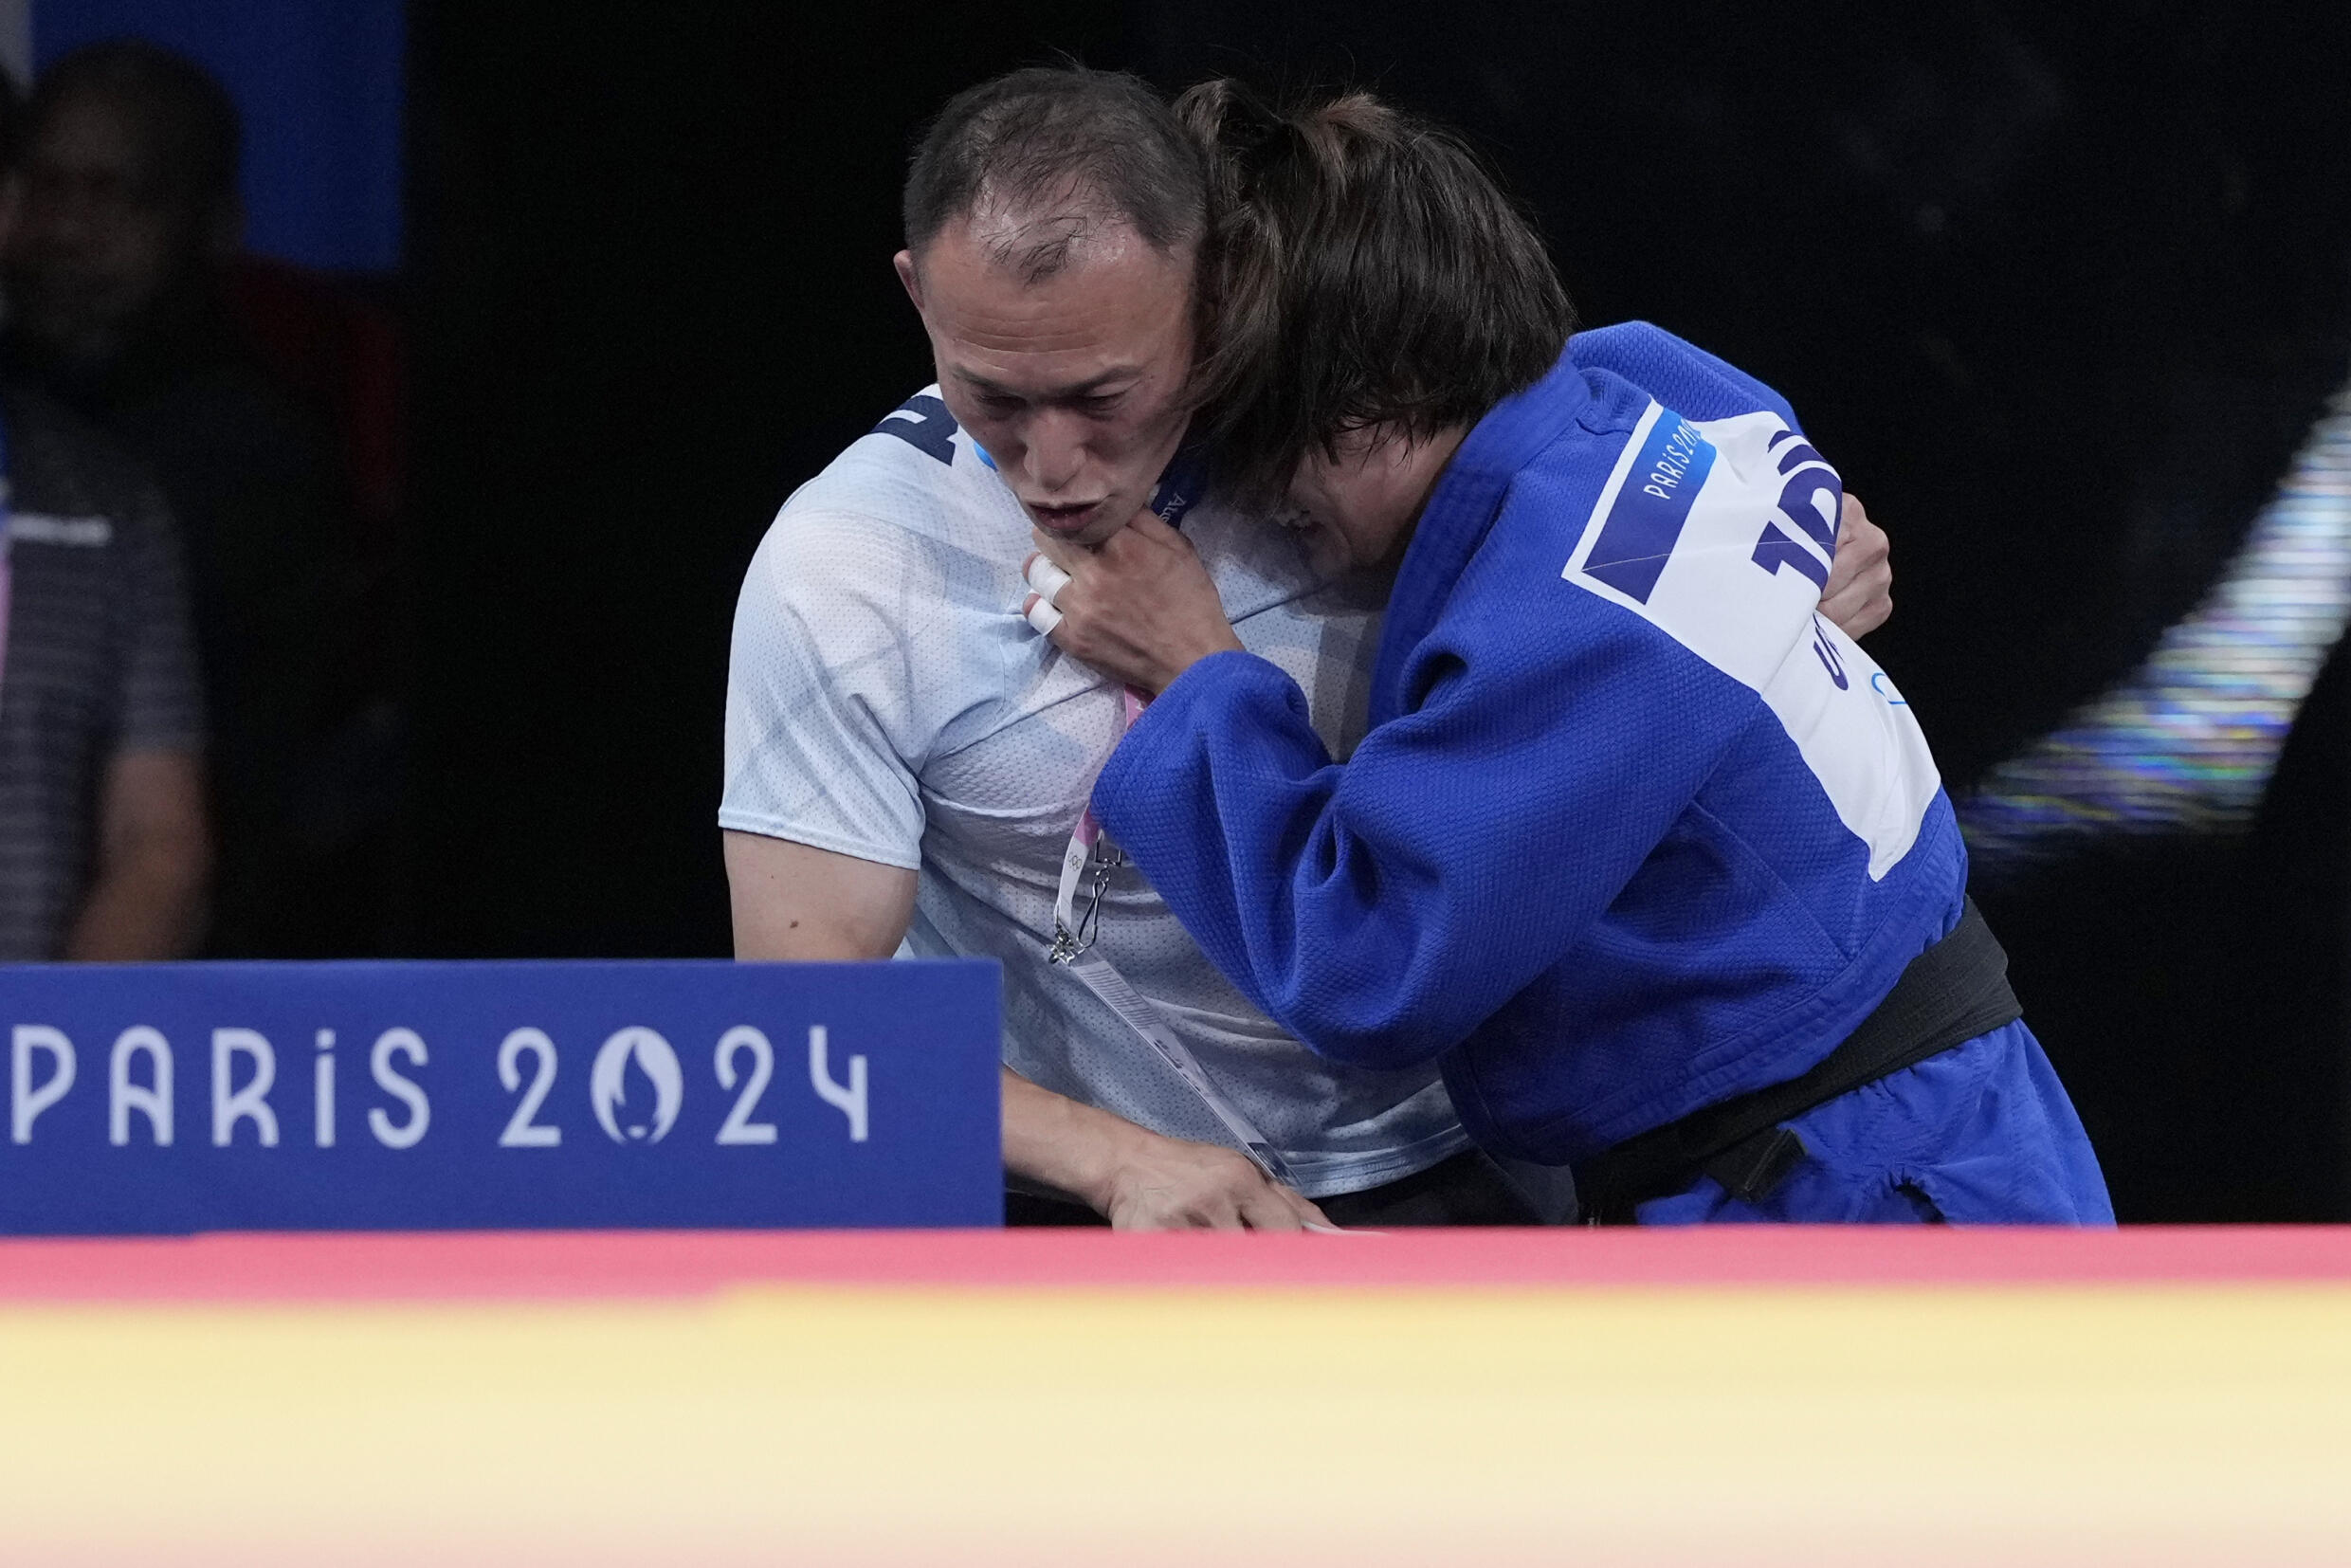 Devastated by her poor performance, Uta Abe collapsed next to her coach, who had to help her walk off the mat.